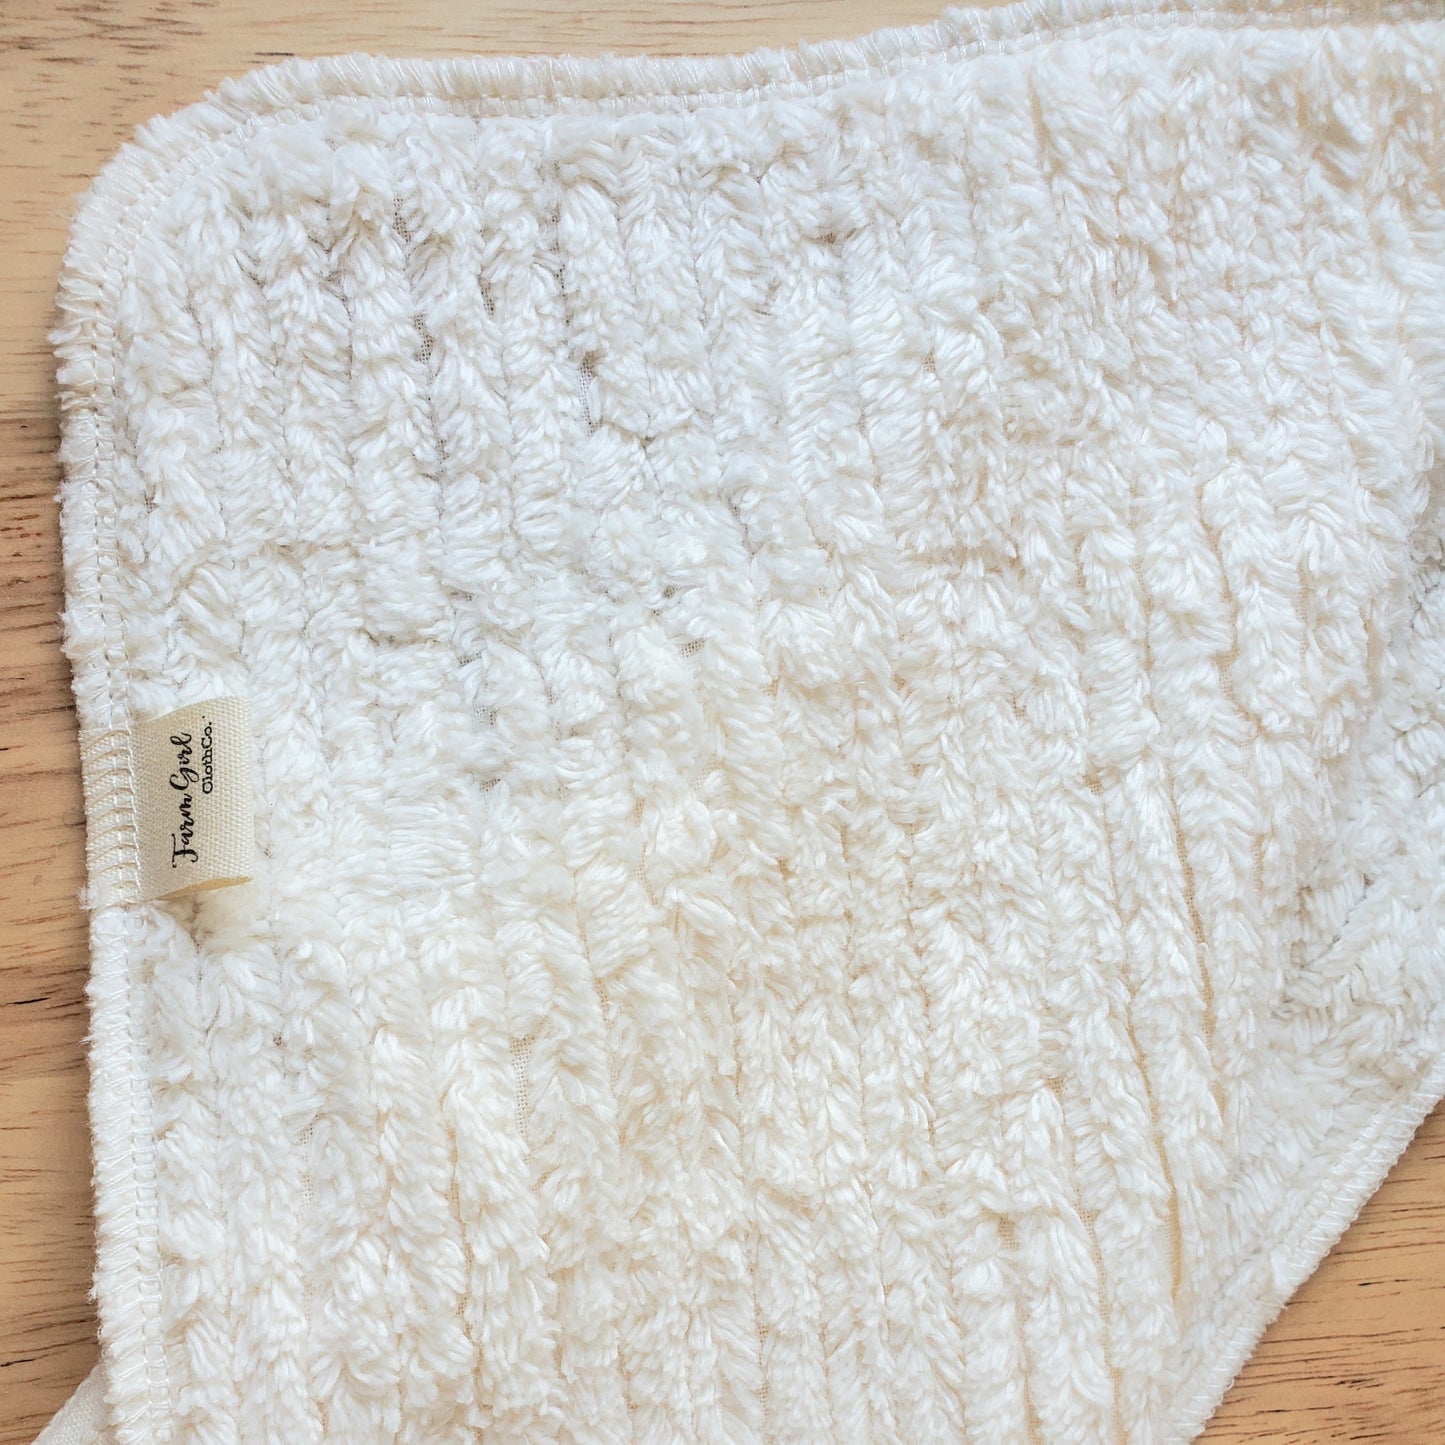 Natural Cotton Cleaning Towel